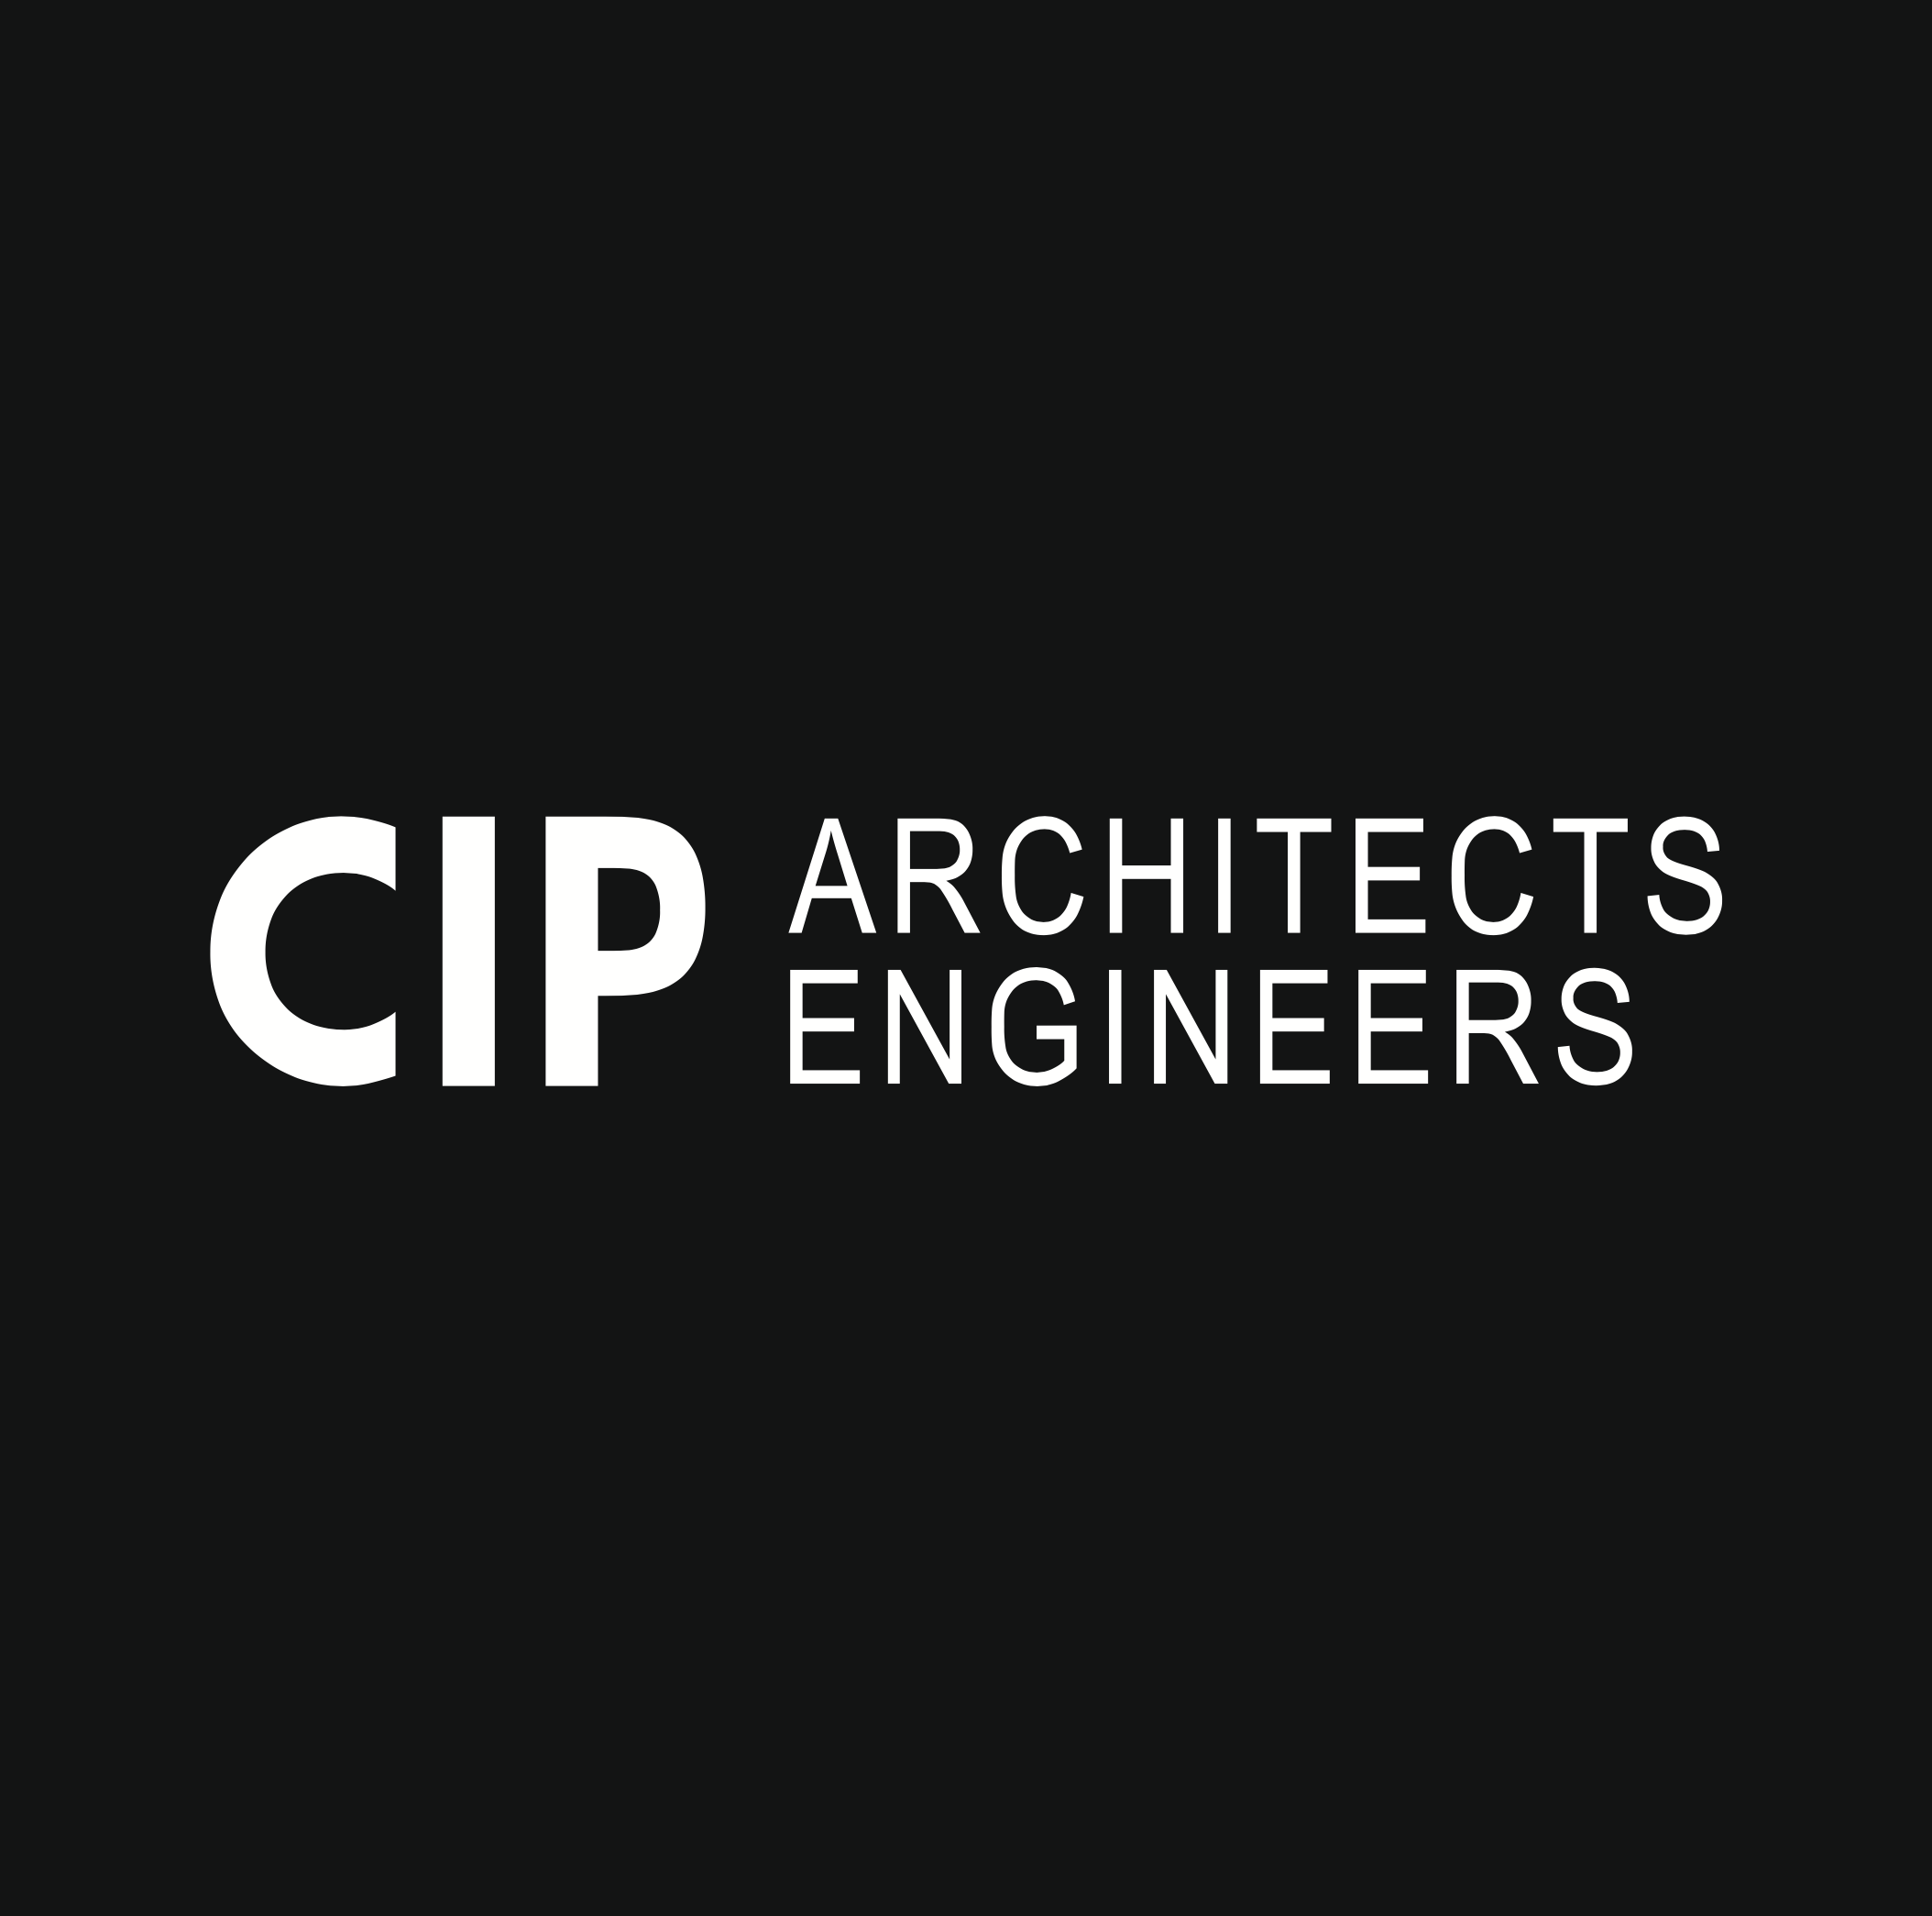 CIP architects